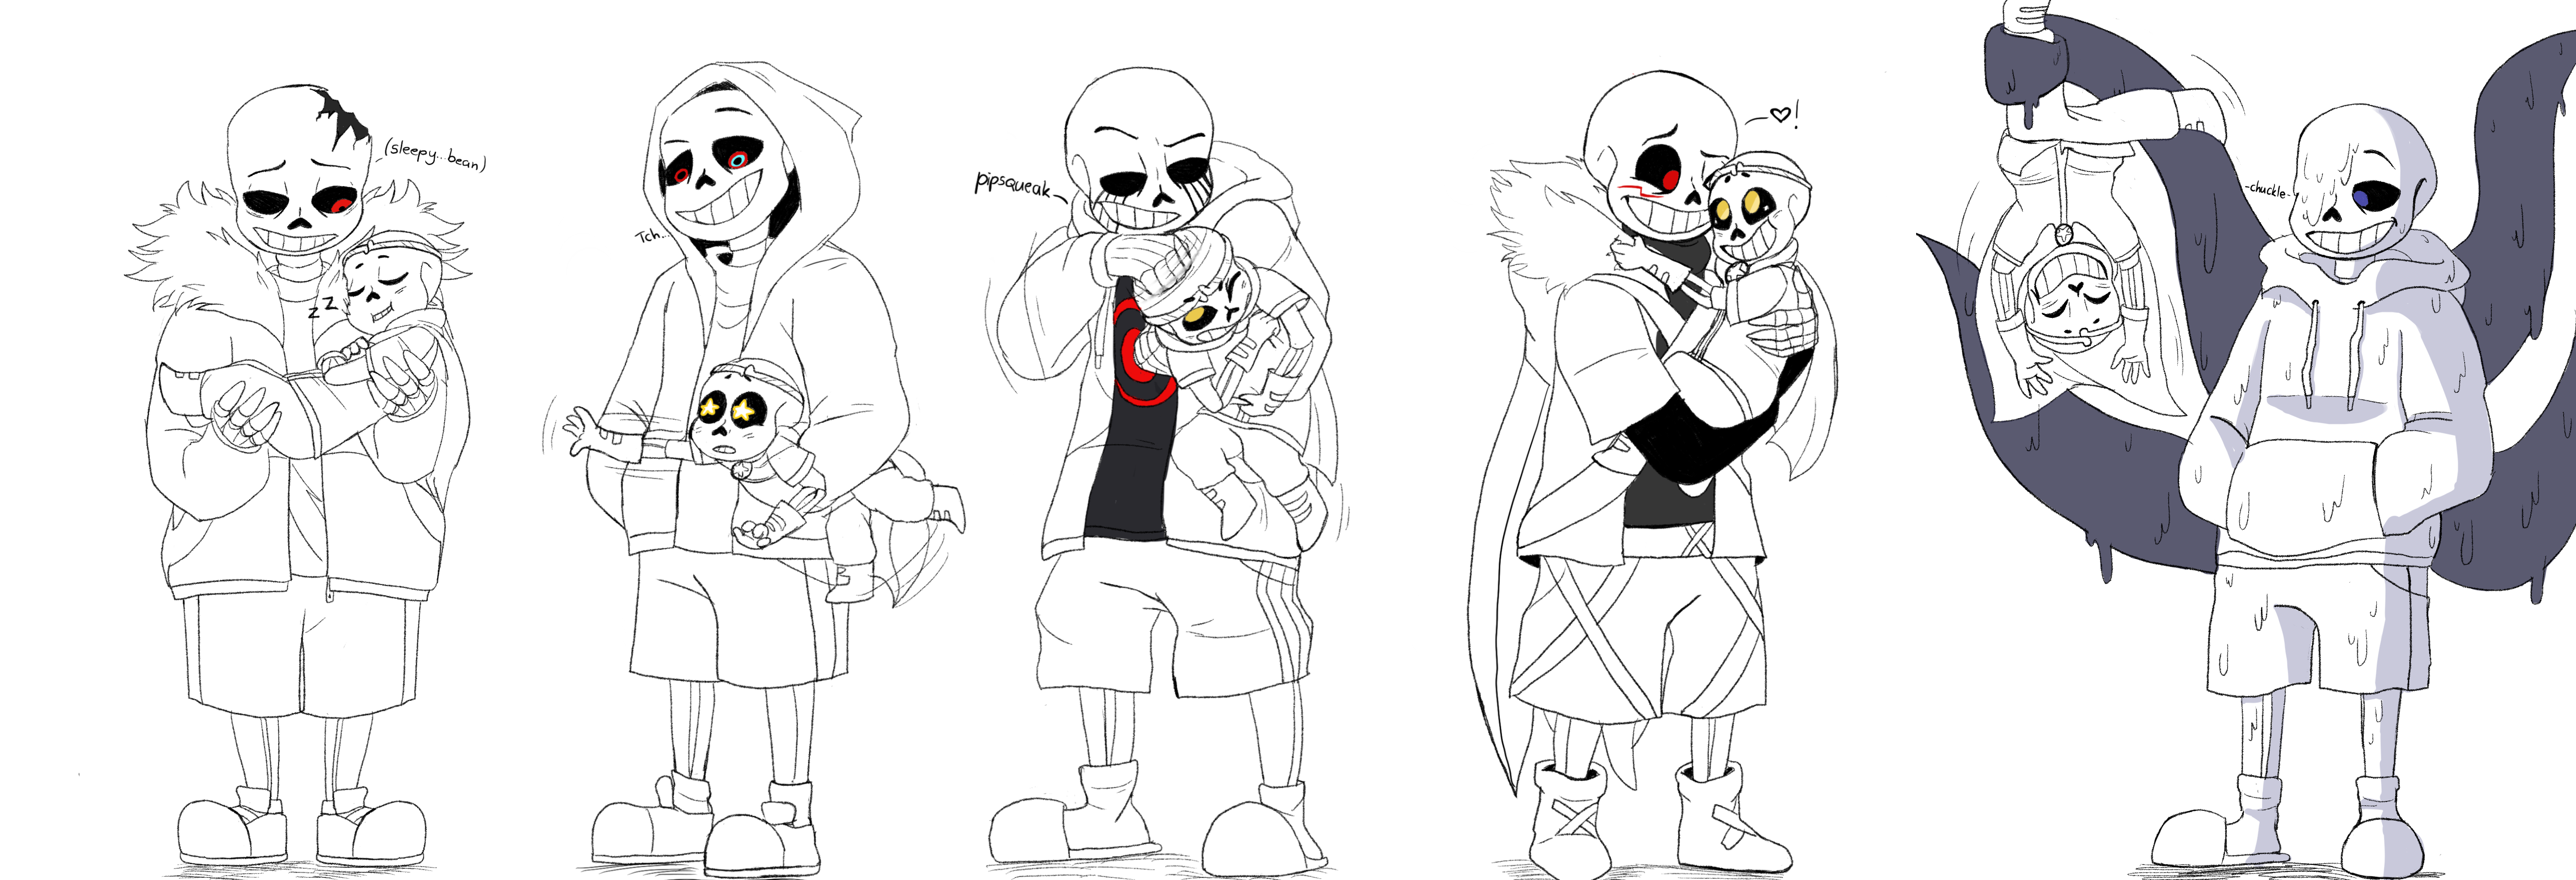 Fanart: Dream sans! (Ispired by one small dream fanfic)